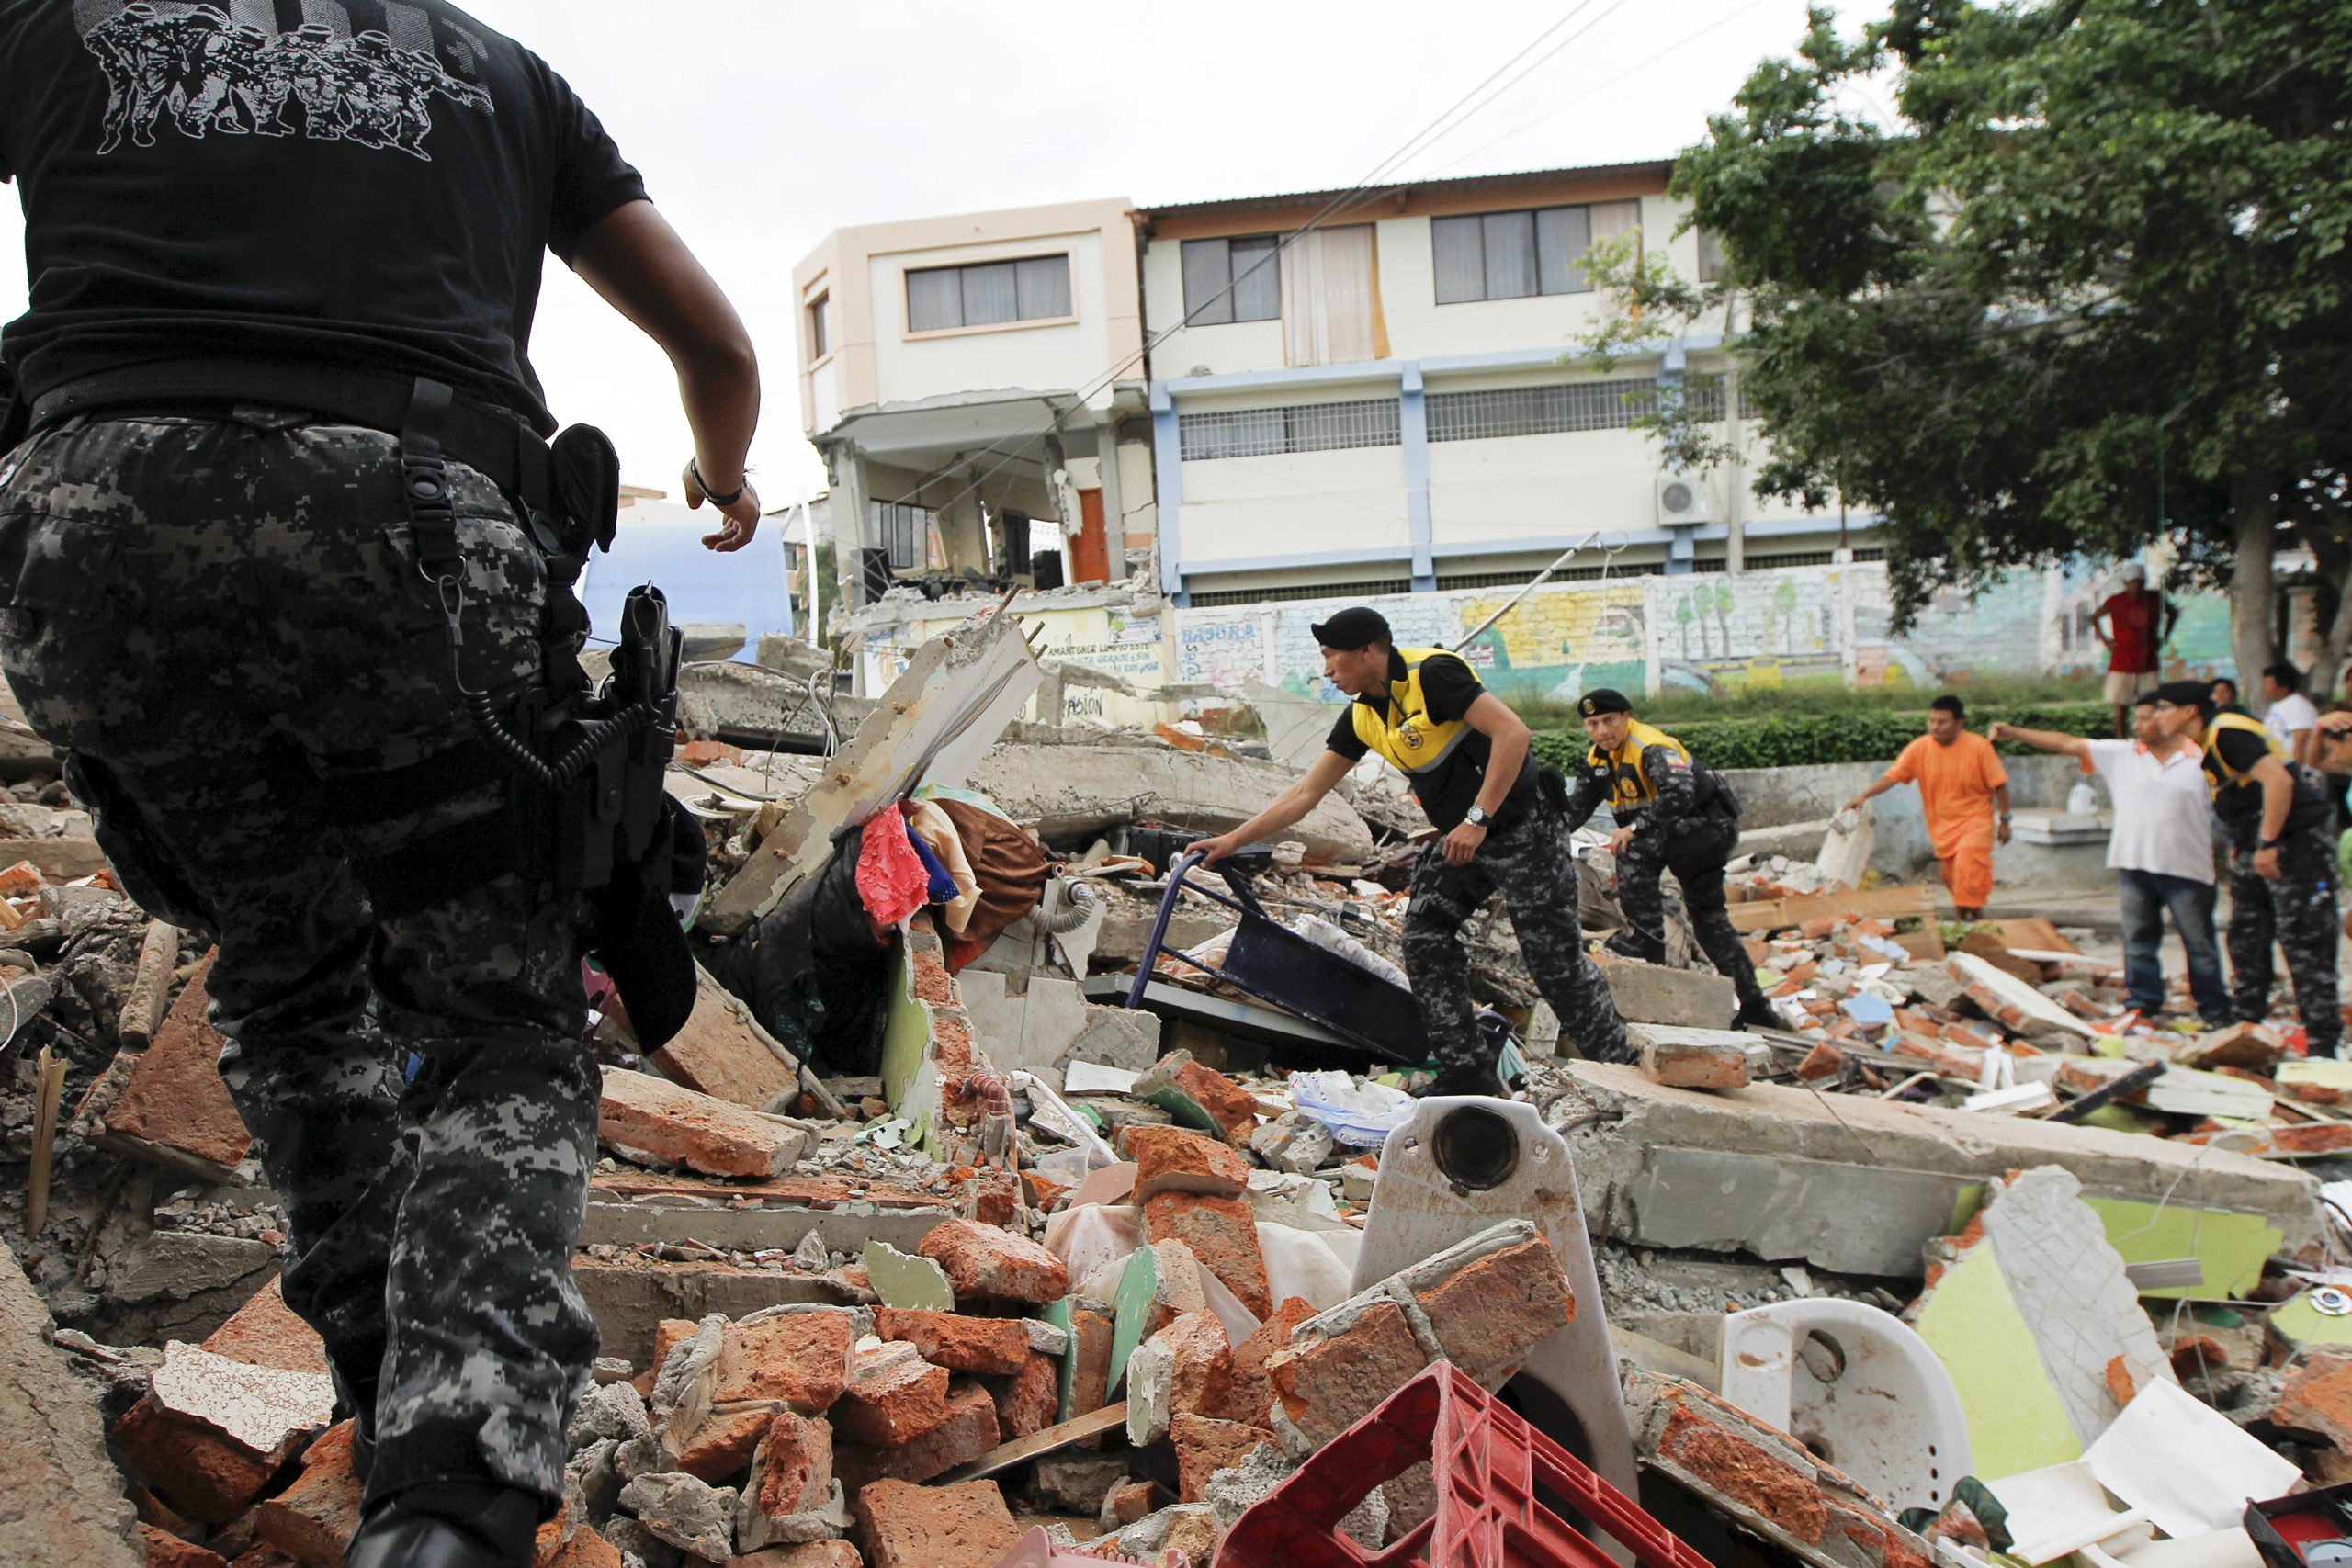 Red Cross members, military and police officers work at a collapsed area after an earthquake struck Manta, off Ecuador's Pacific coast, on April 17, 2016.